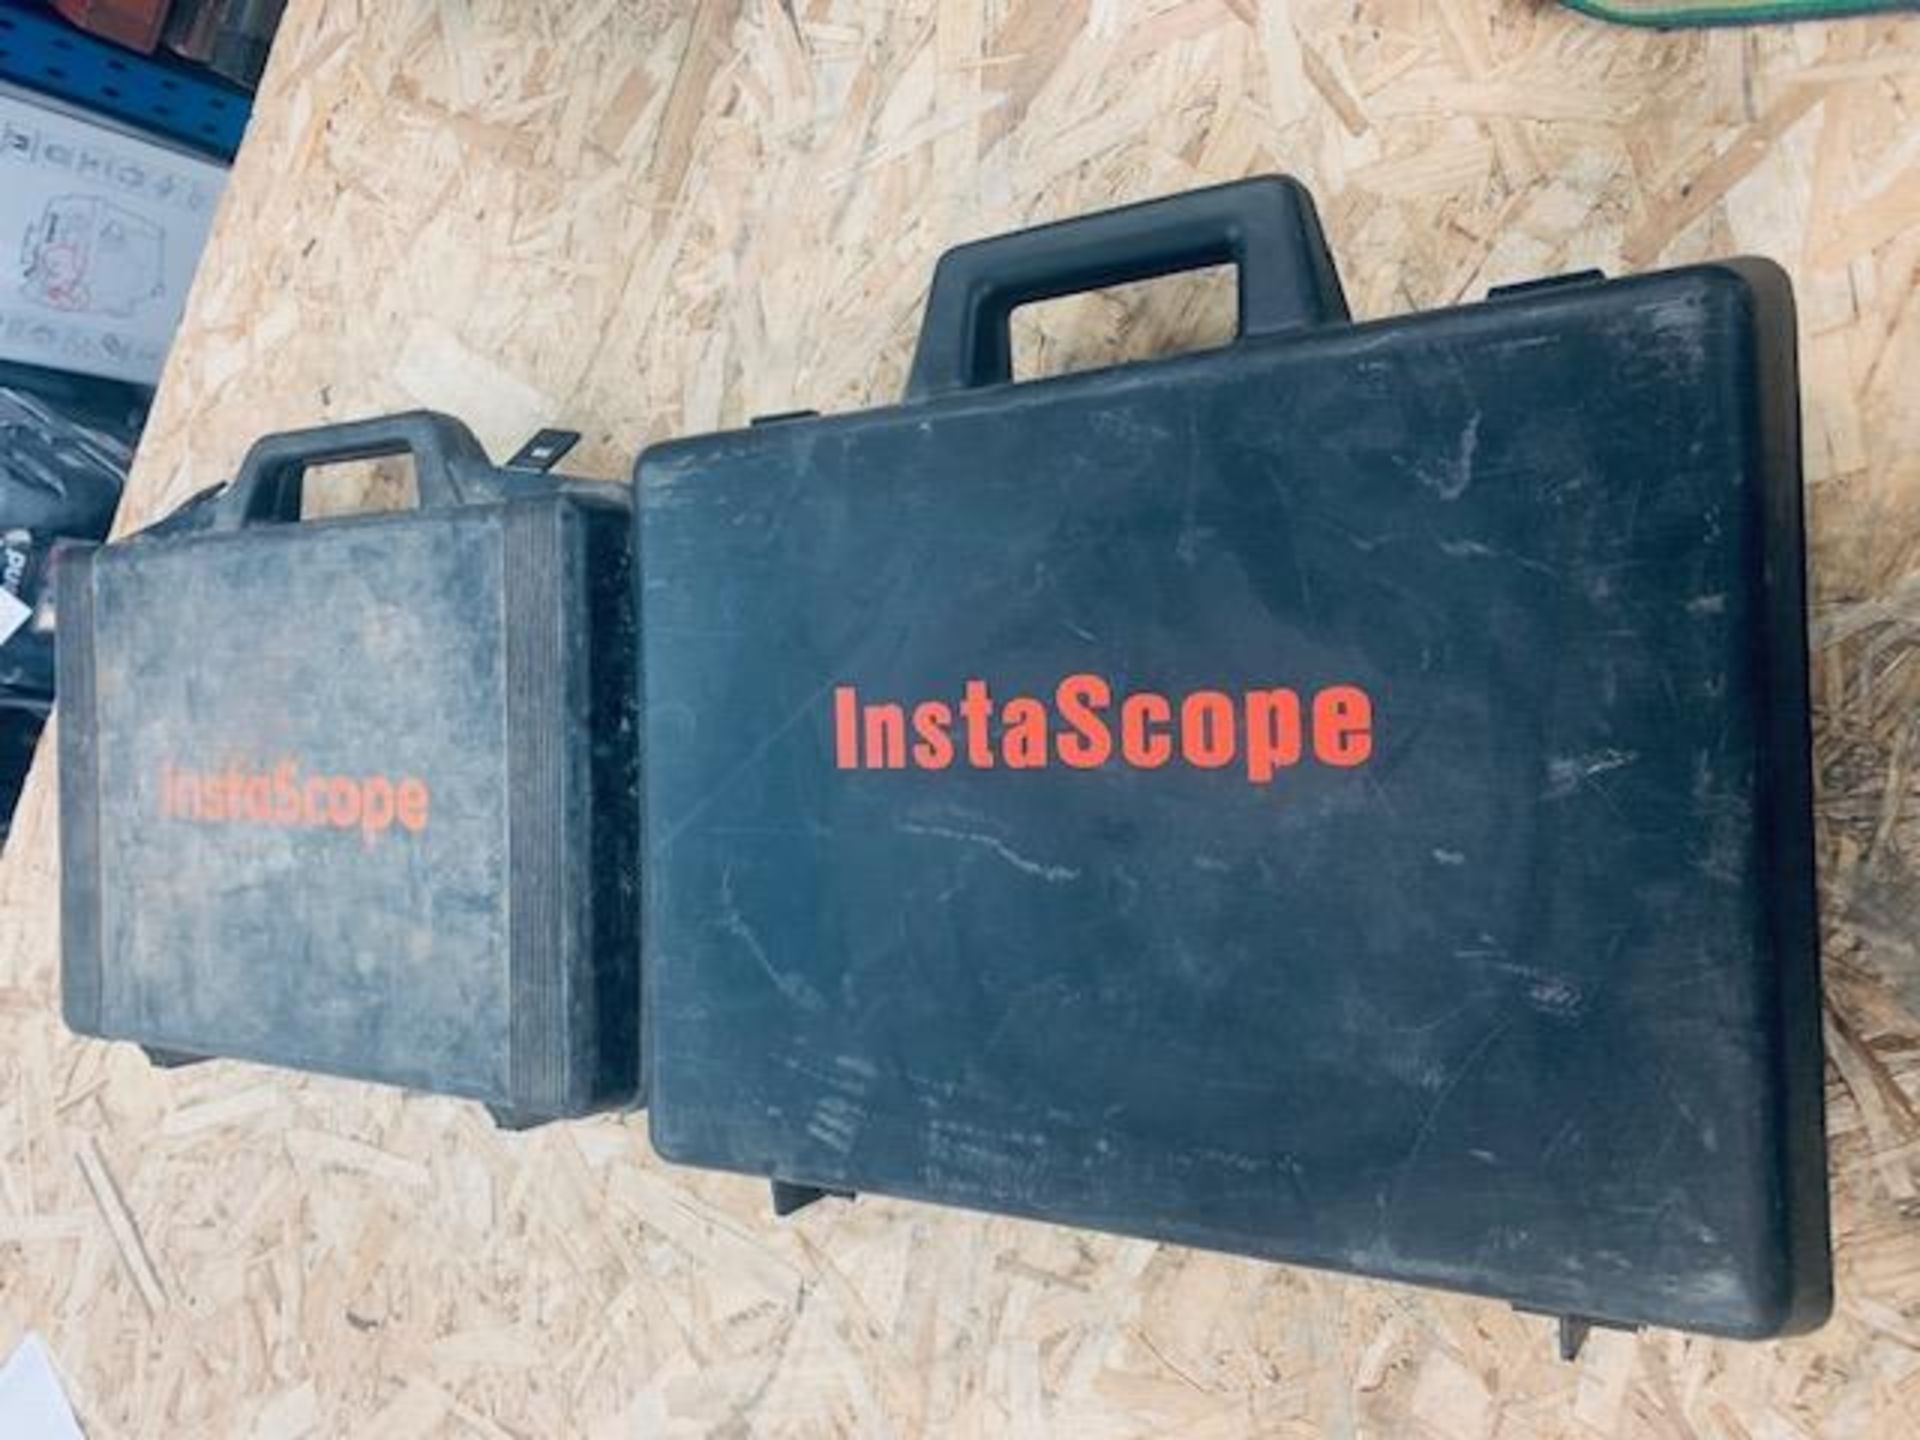 2x Instascope viewing scopes - Image 3 of 3